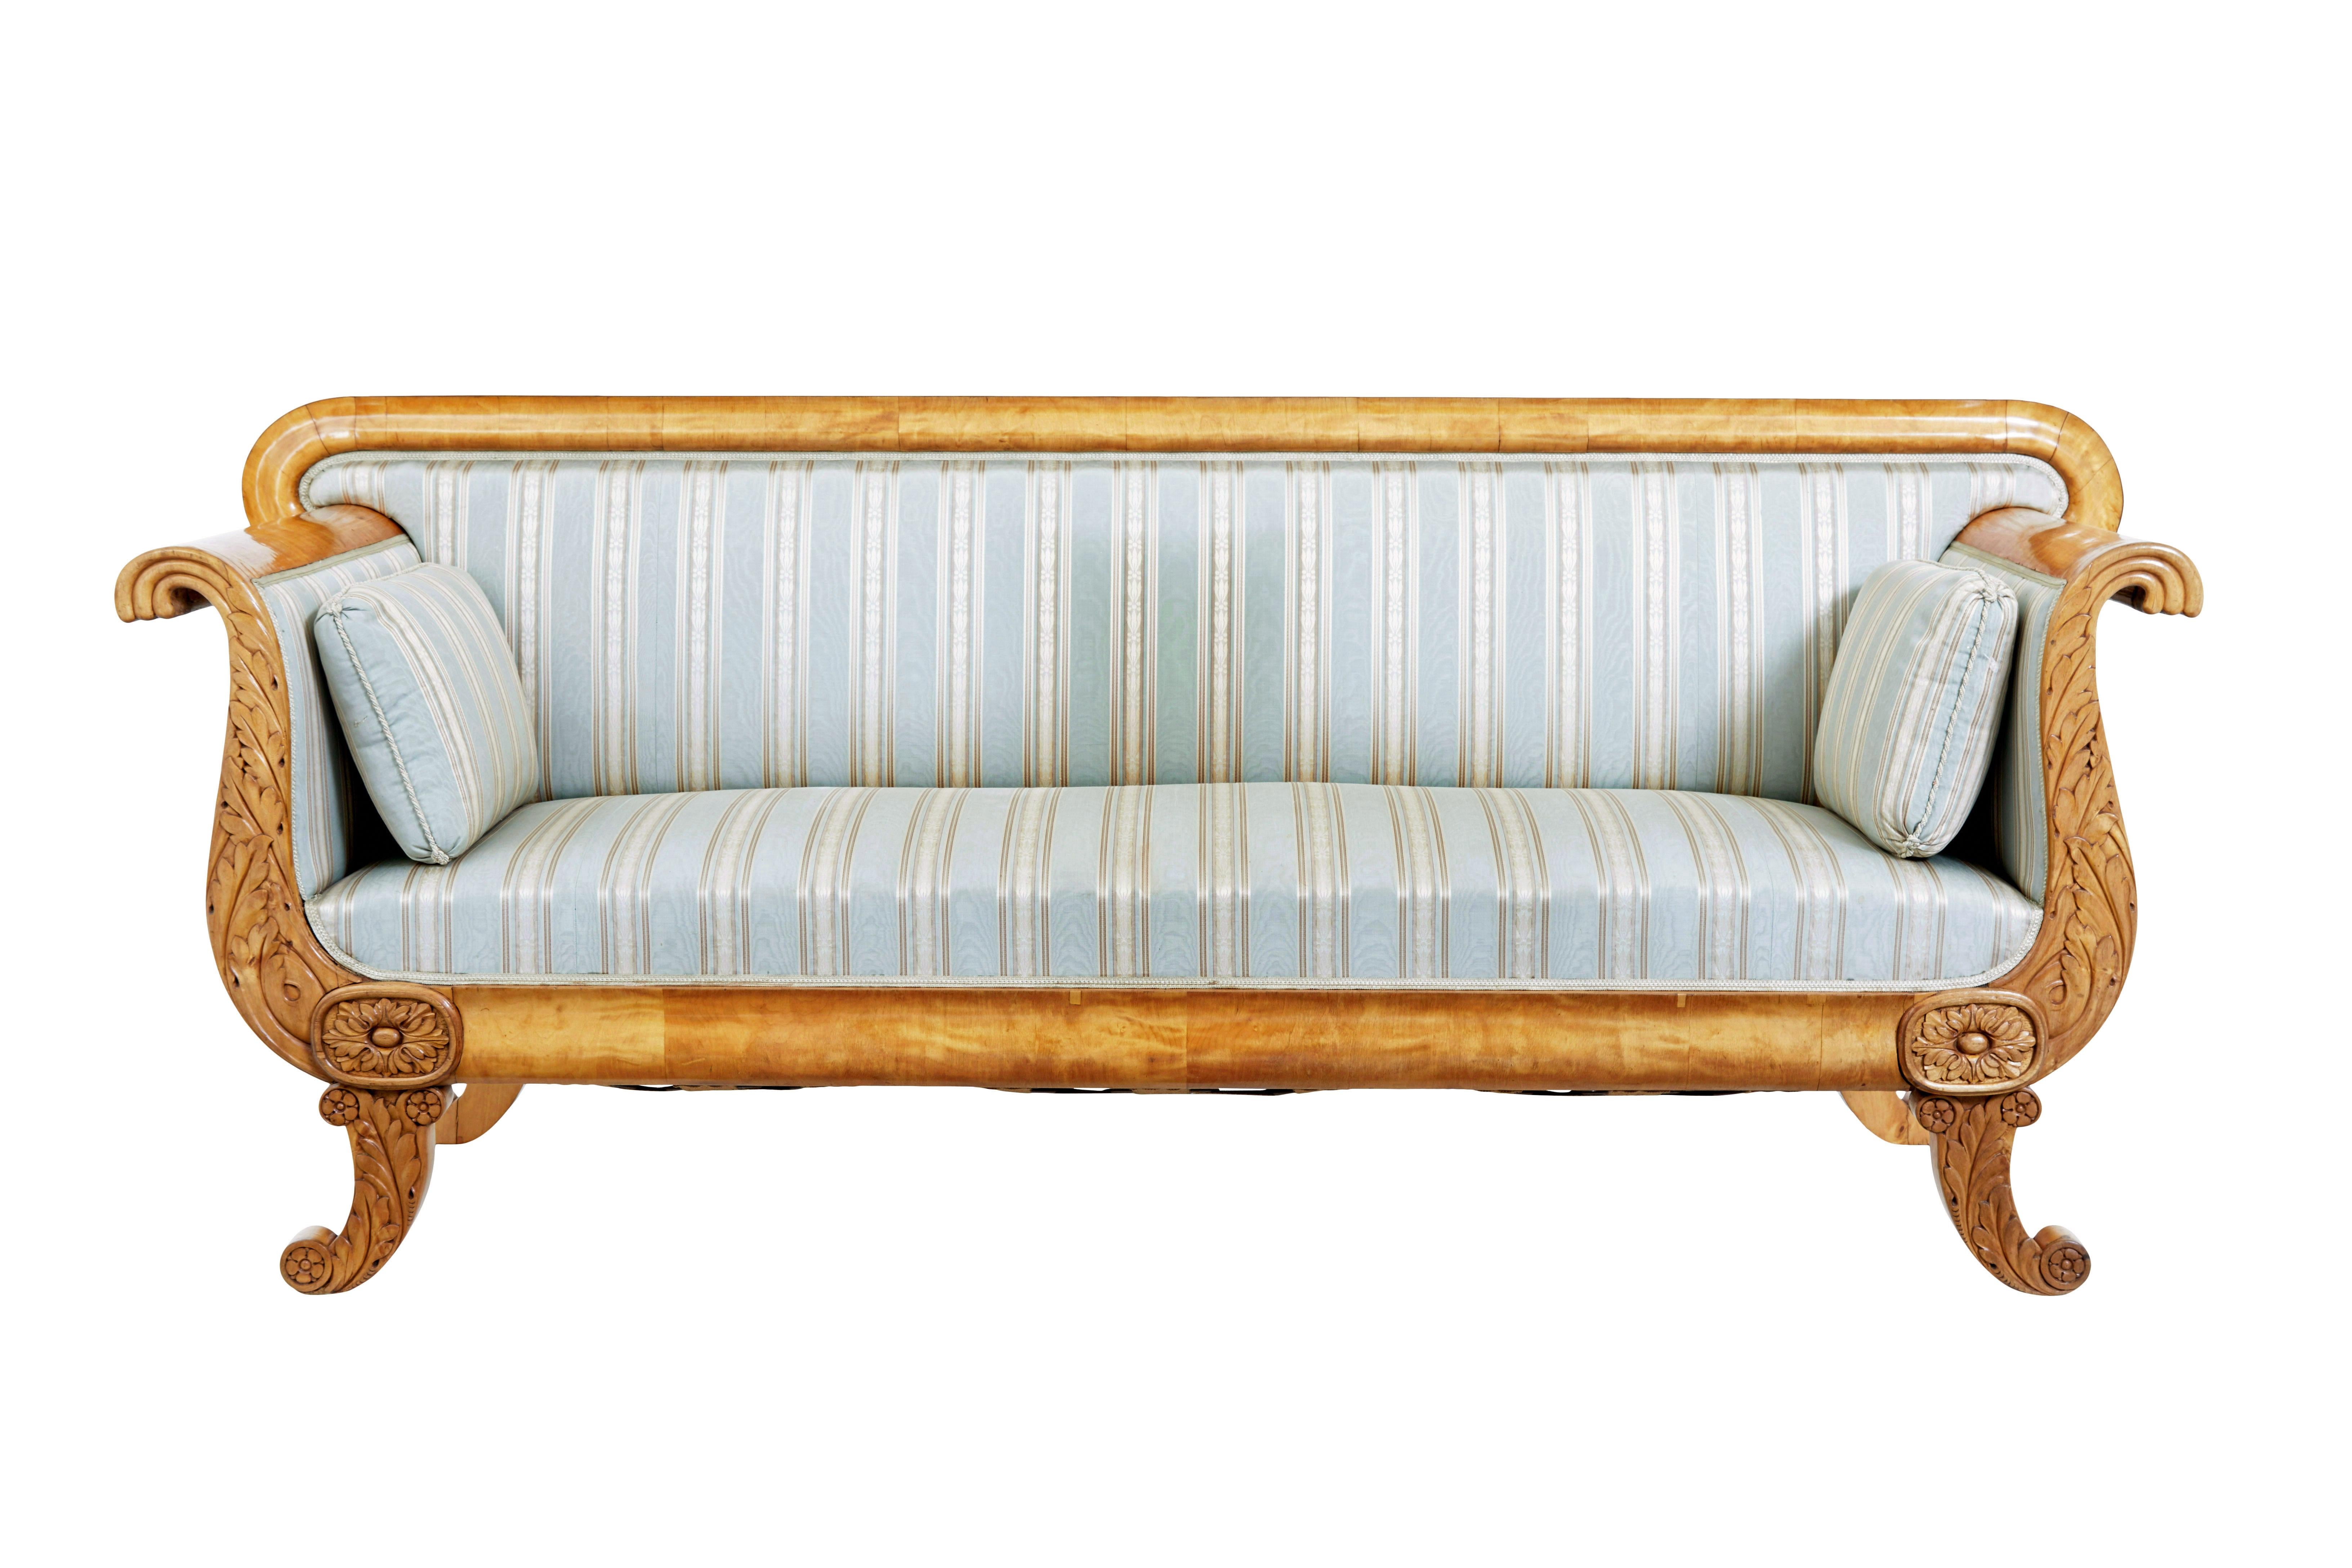 19th century swedish carved birch sofa circa 1880.

Elegant swedish formal sofa which seats a comfortable 3.  Straight back with shaped birch border.  Roll top arms with carved acanthus leaf detailing flowing down to the applied carved plaque above